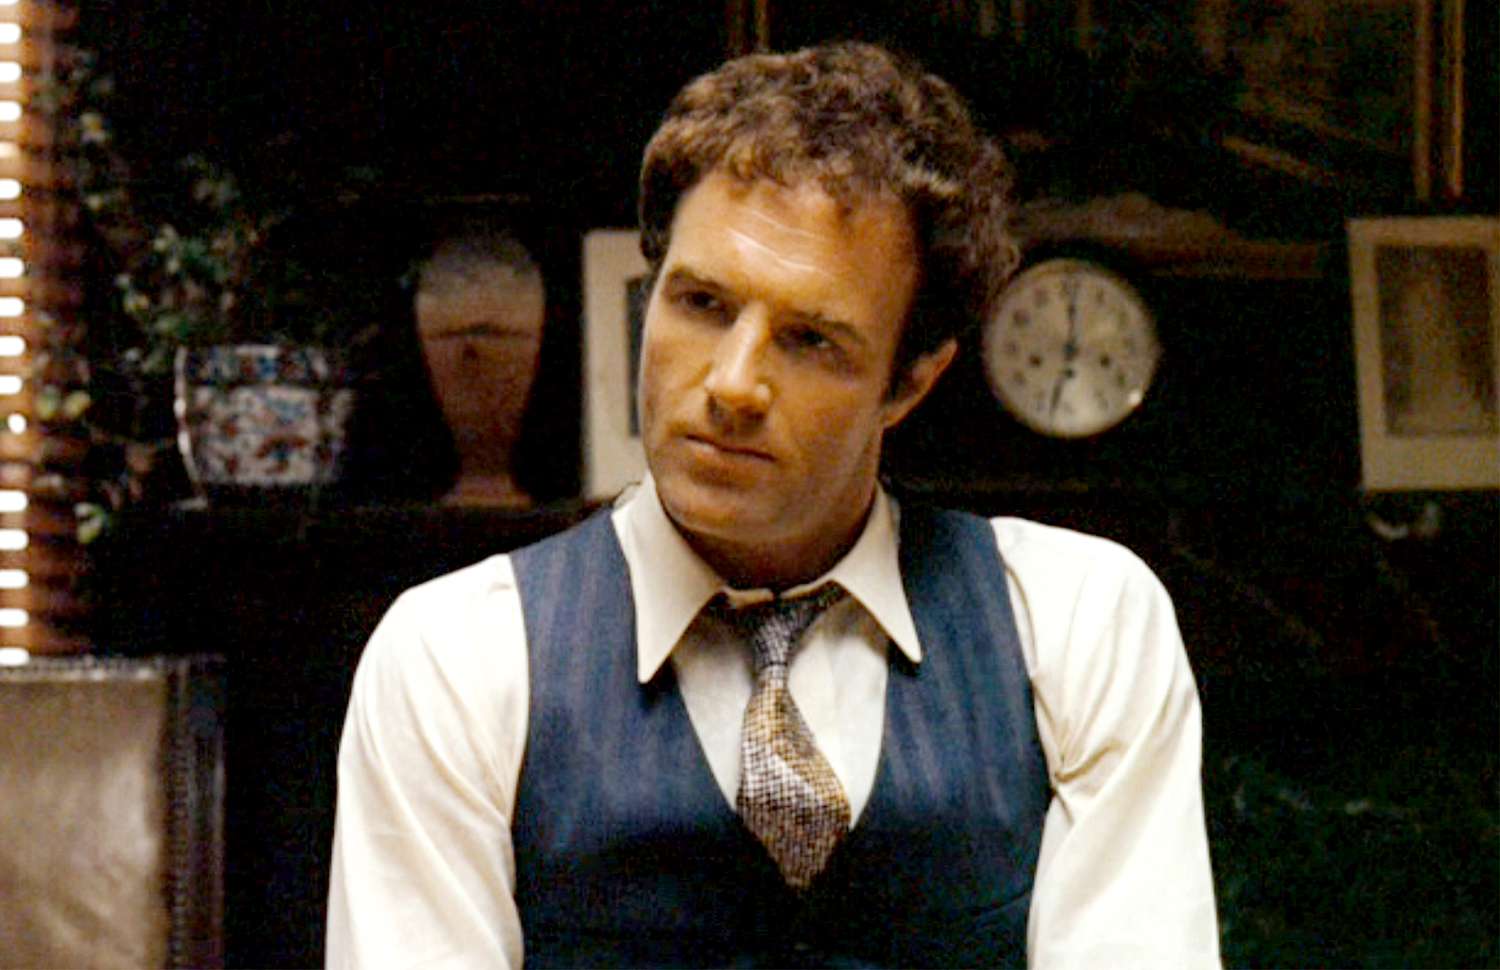 James Caan Says He Walked Out of Godfather Screening Over Cut Scene |  PEOPLE.com